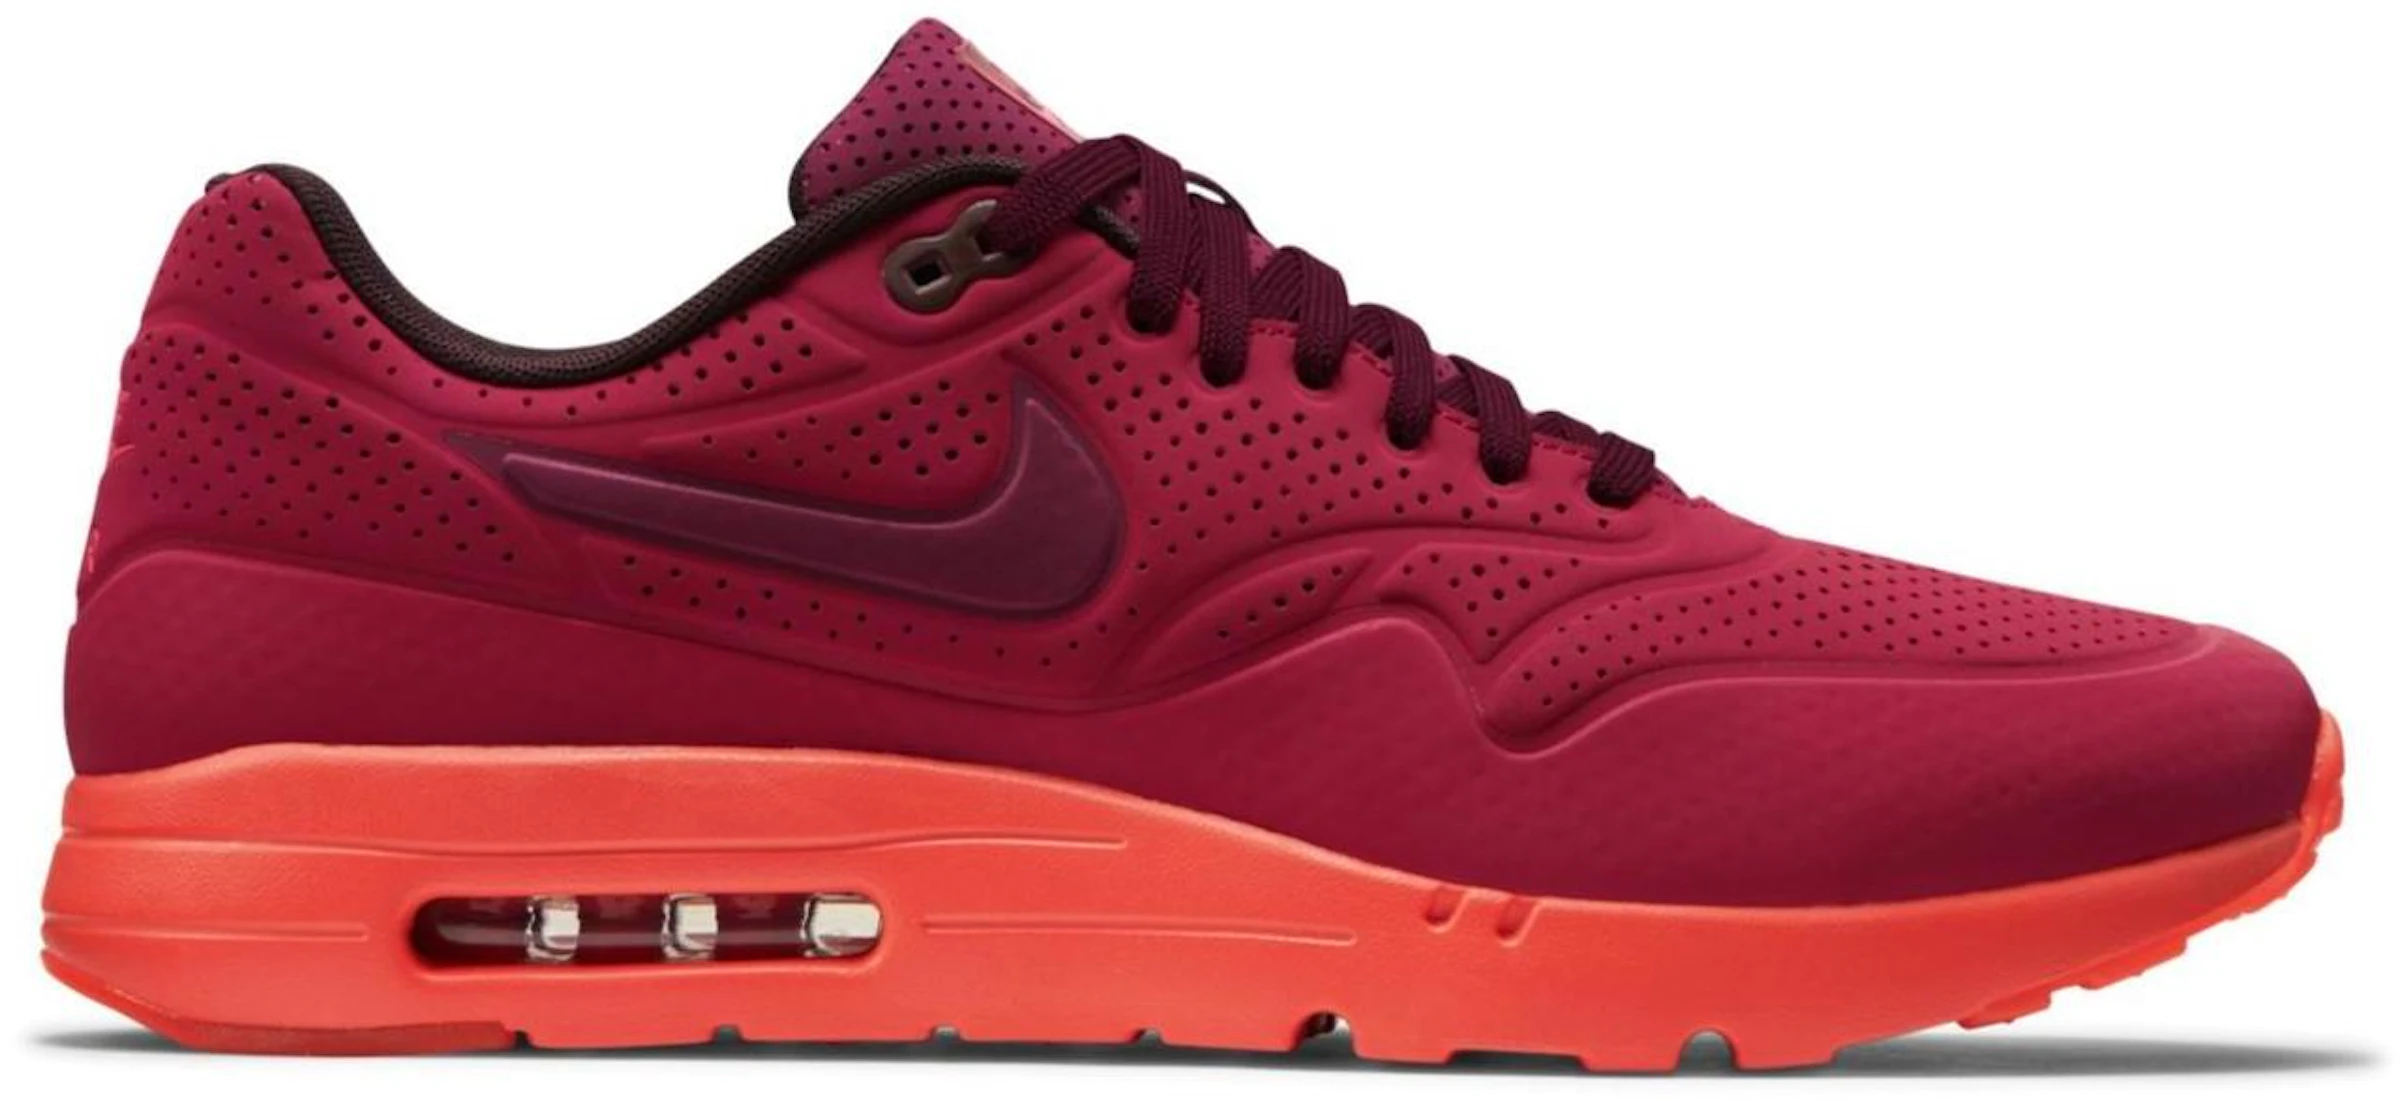 Nike Max 1 Ultra Moire Gym Red - 705297-600 - US